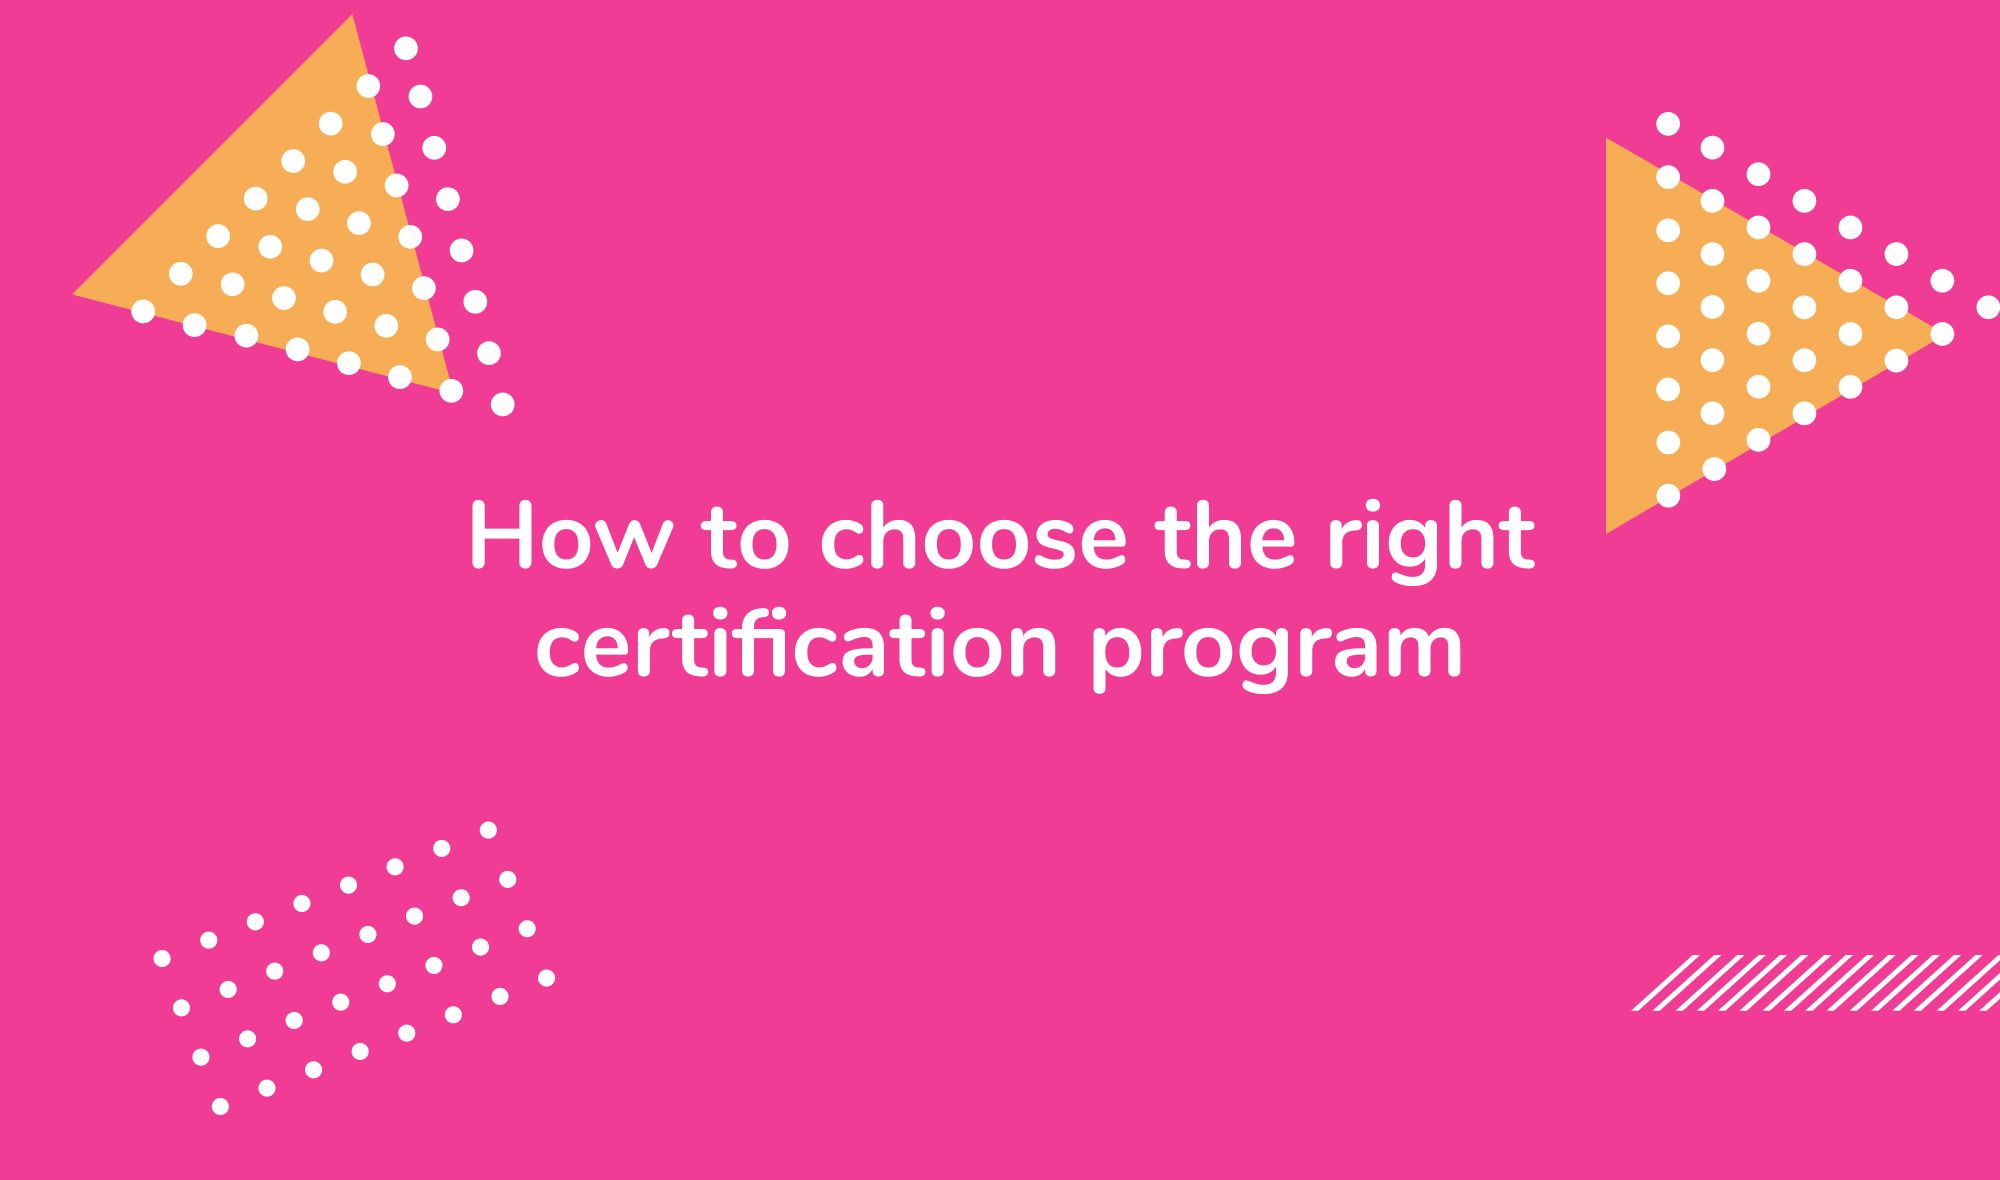 How to choose the right certification program